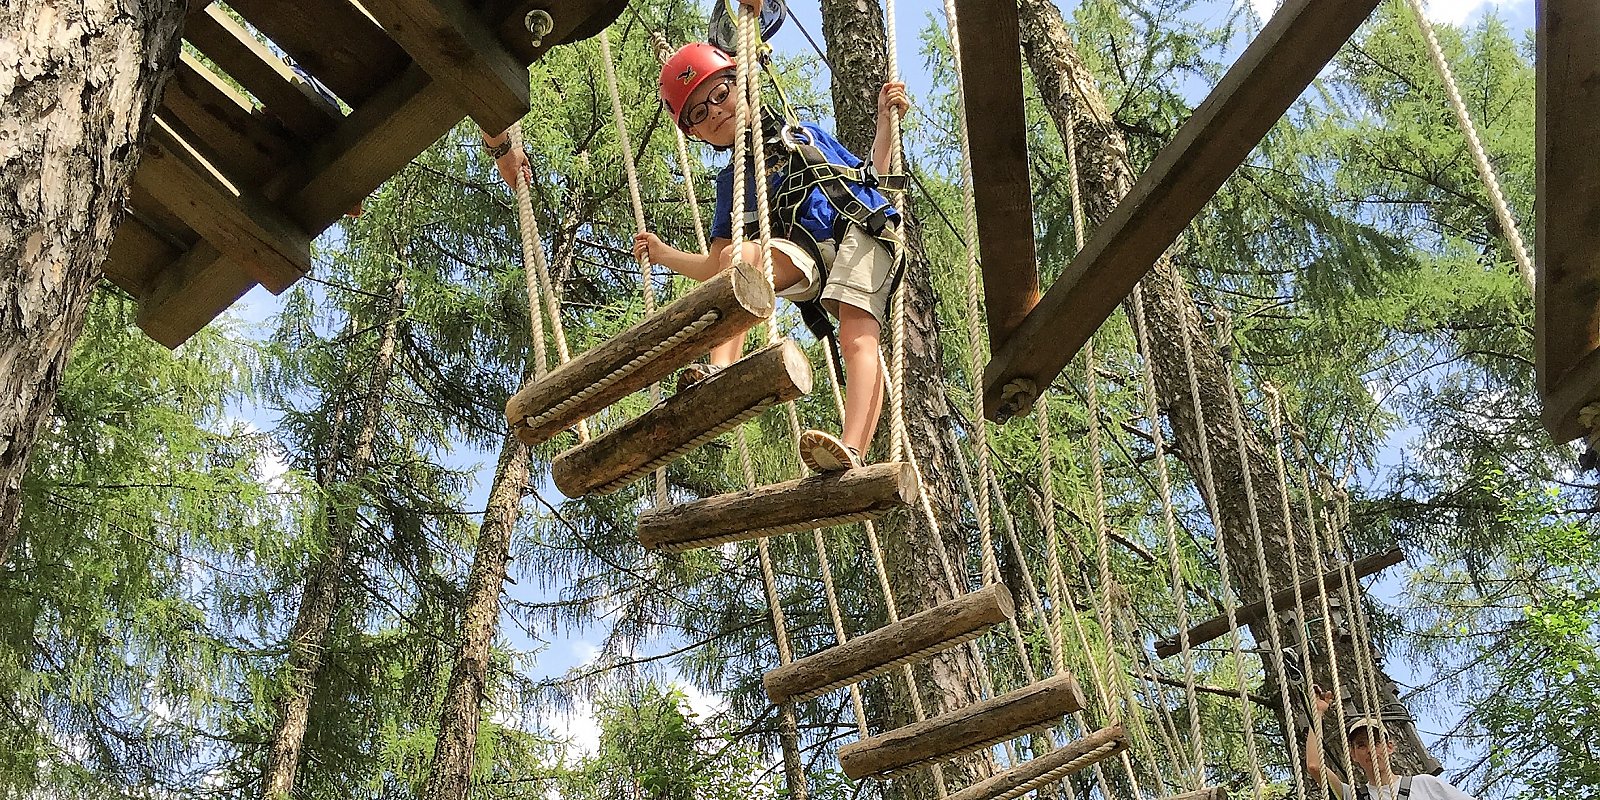 High ropes course